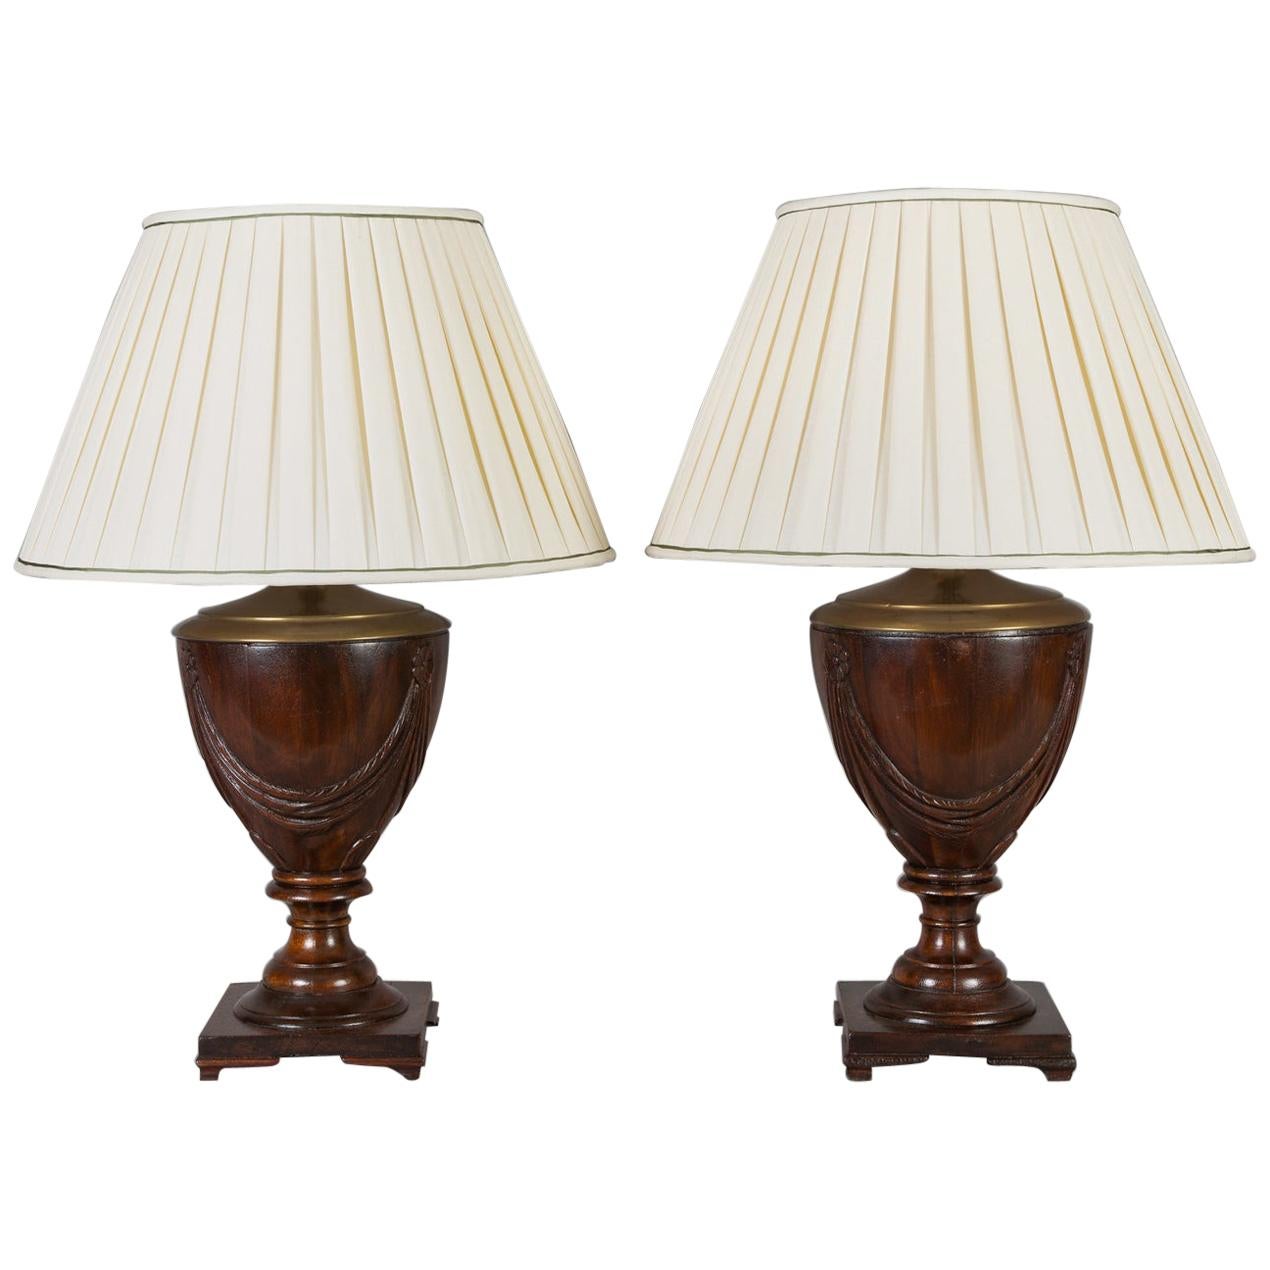 Pair of Mahogany Urn Shaped Lamps For Sale